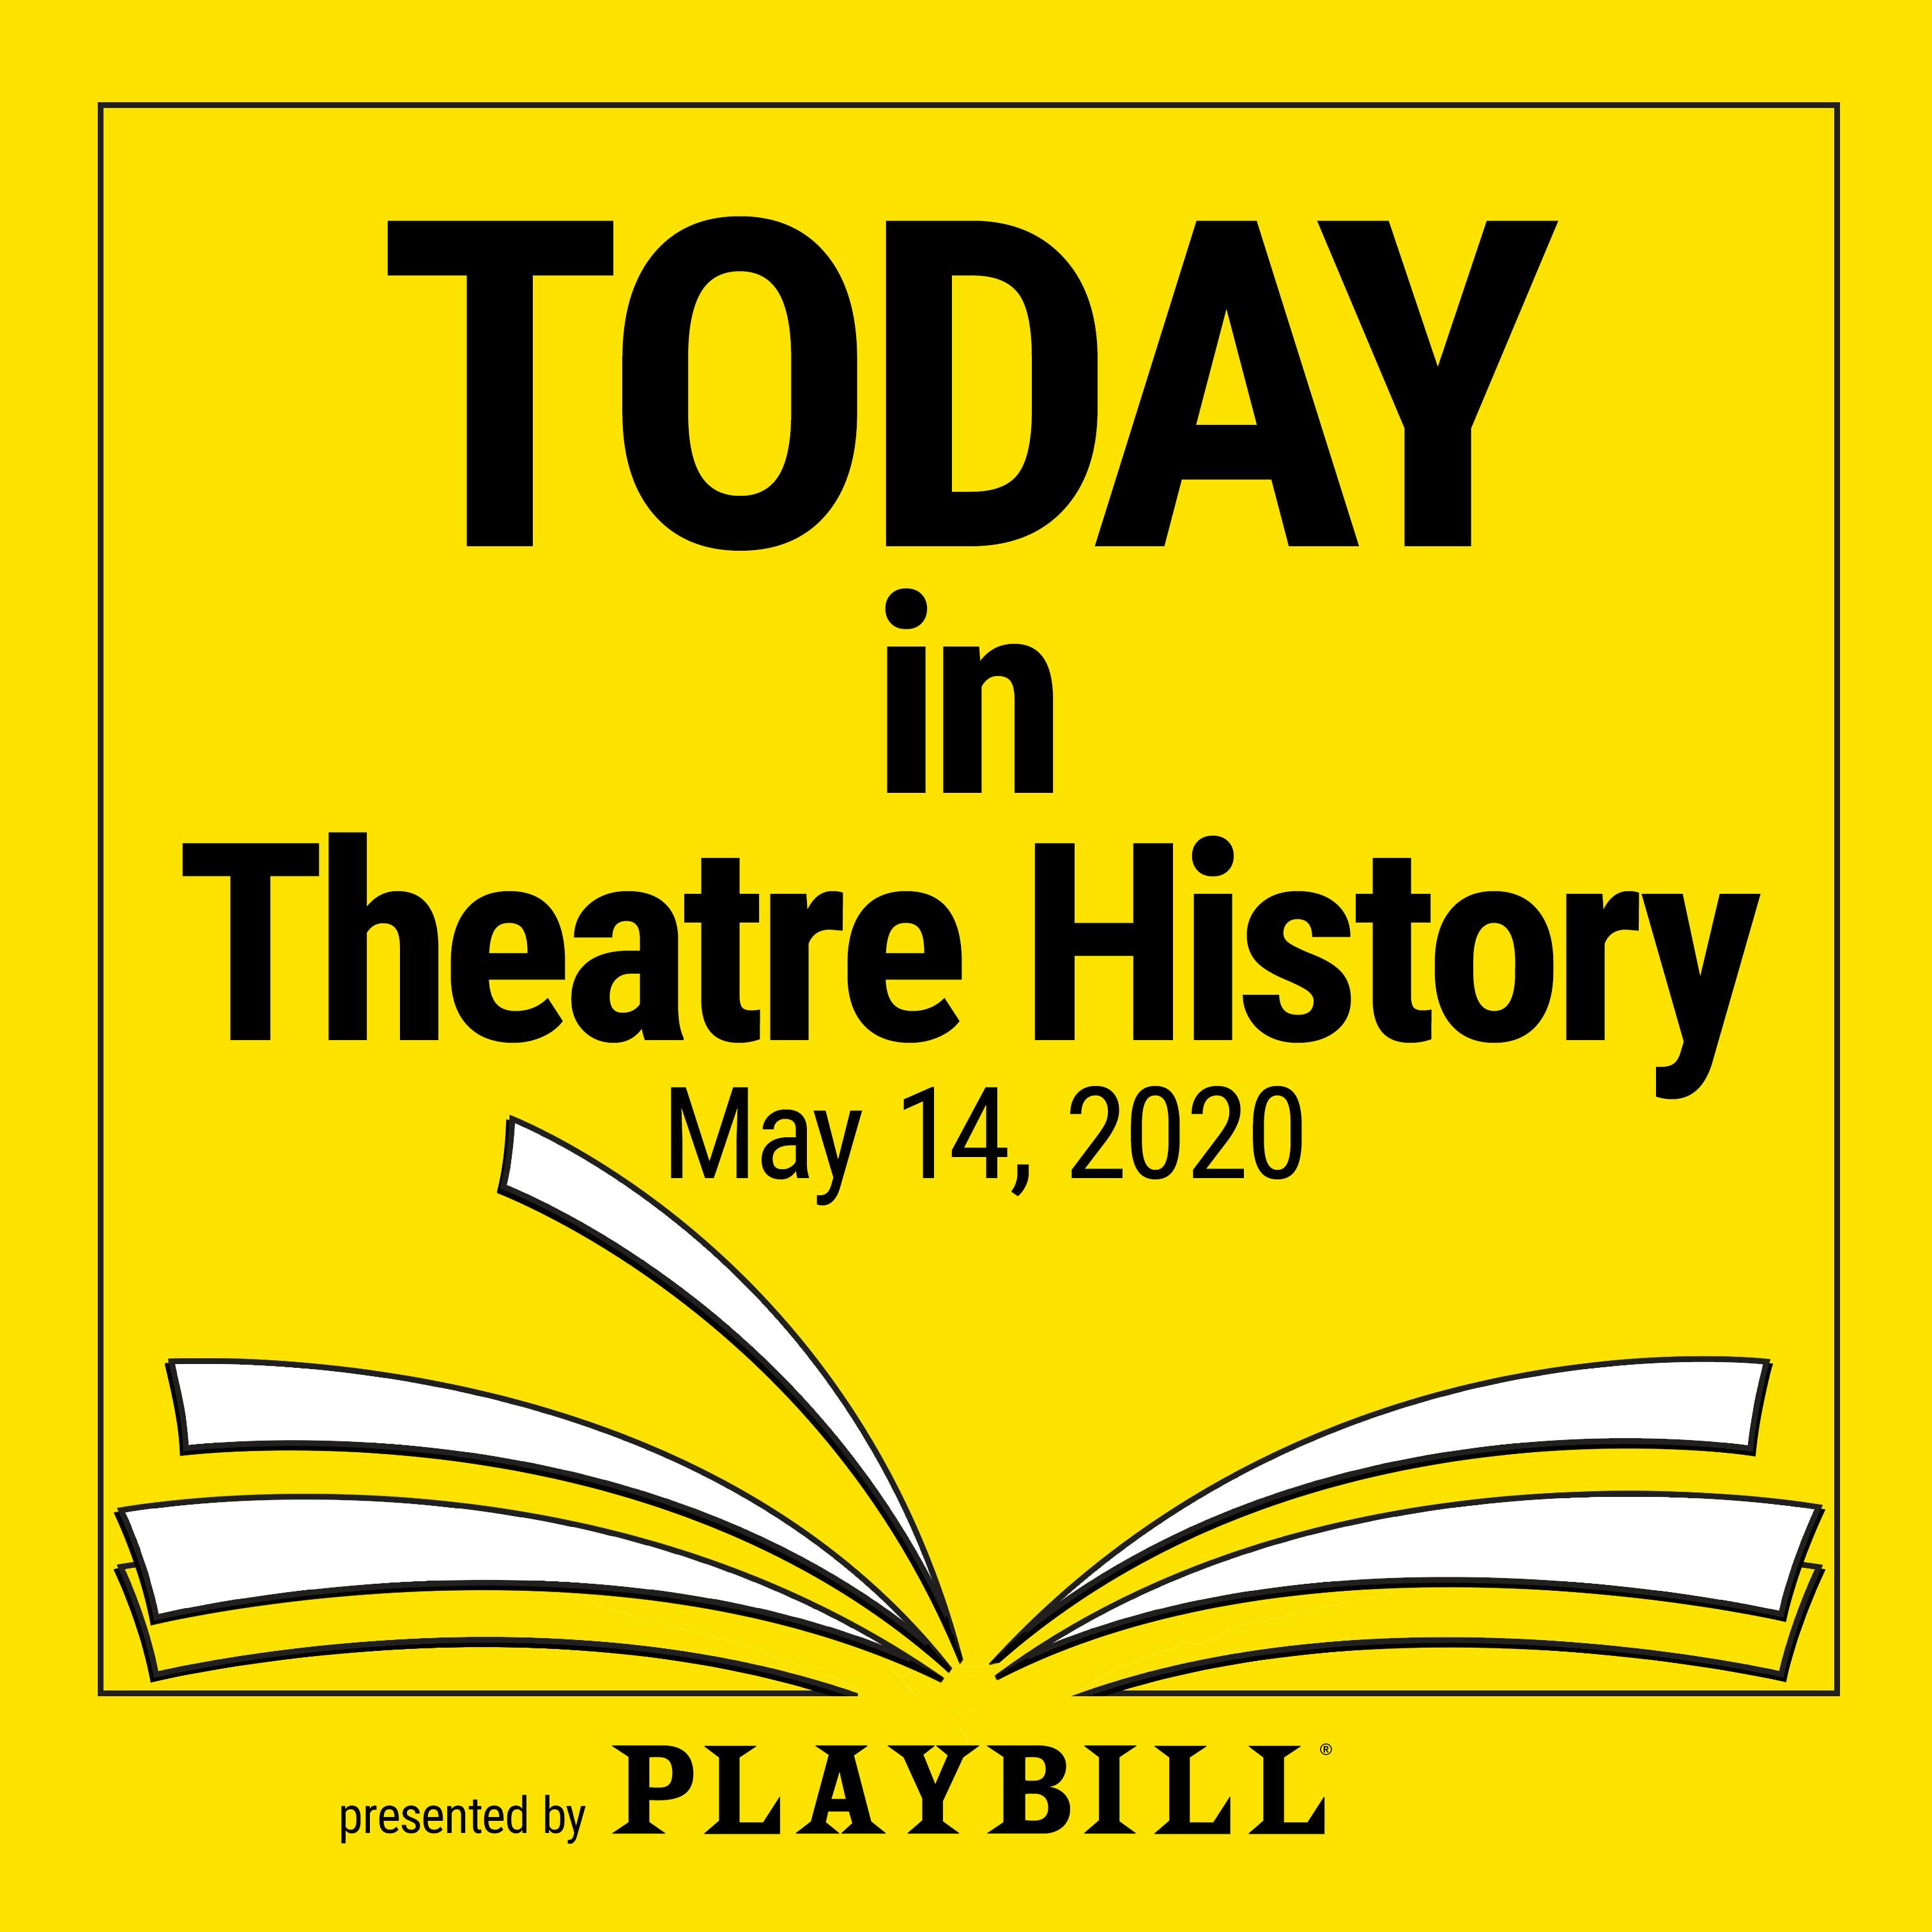 May 14, 2020: Gwen Verdon and Thelma Ritter opened in New Girl in Town, the 1957 musical adaptation of Anna Christie.